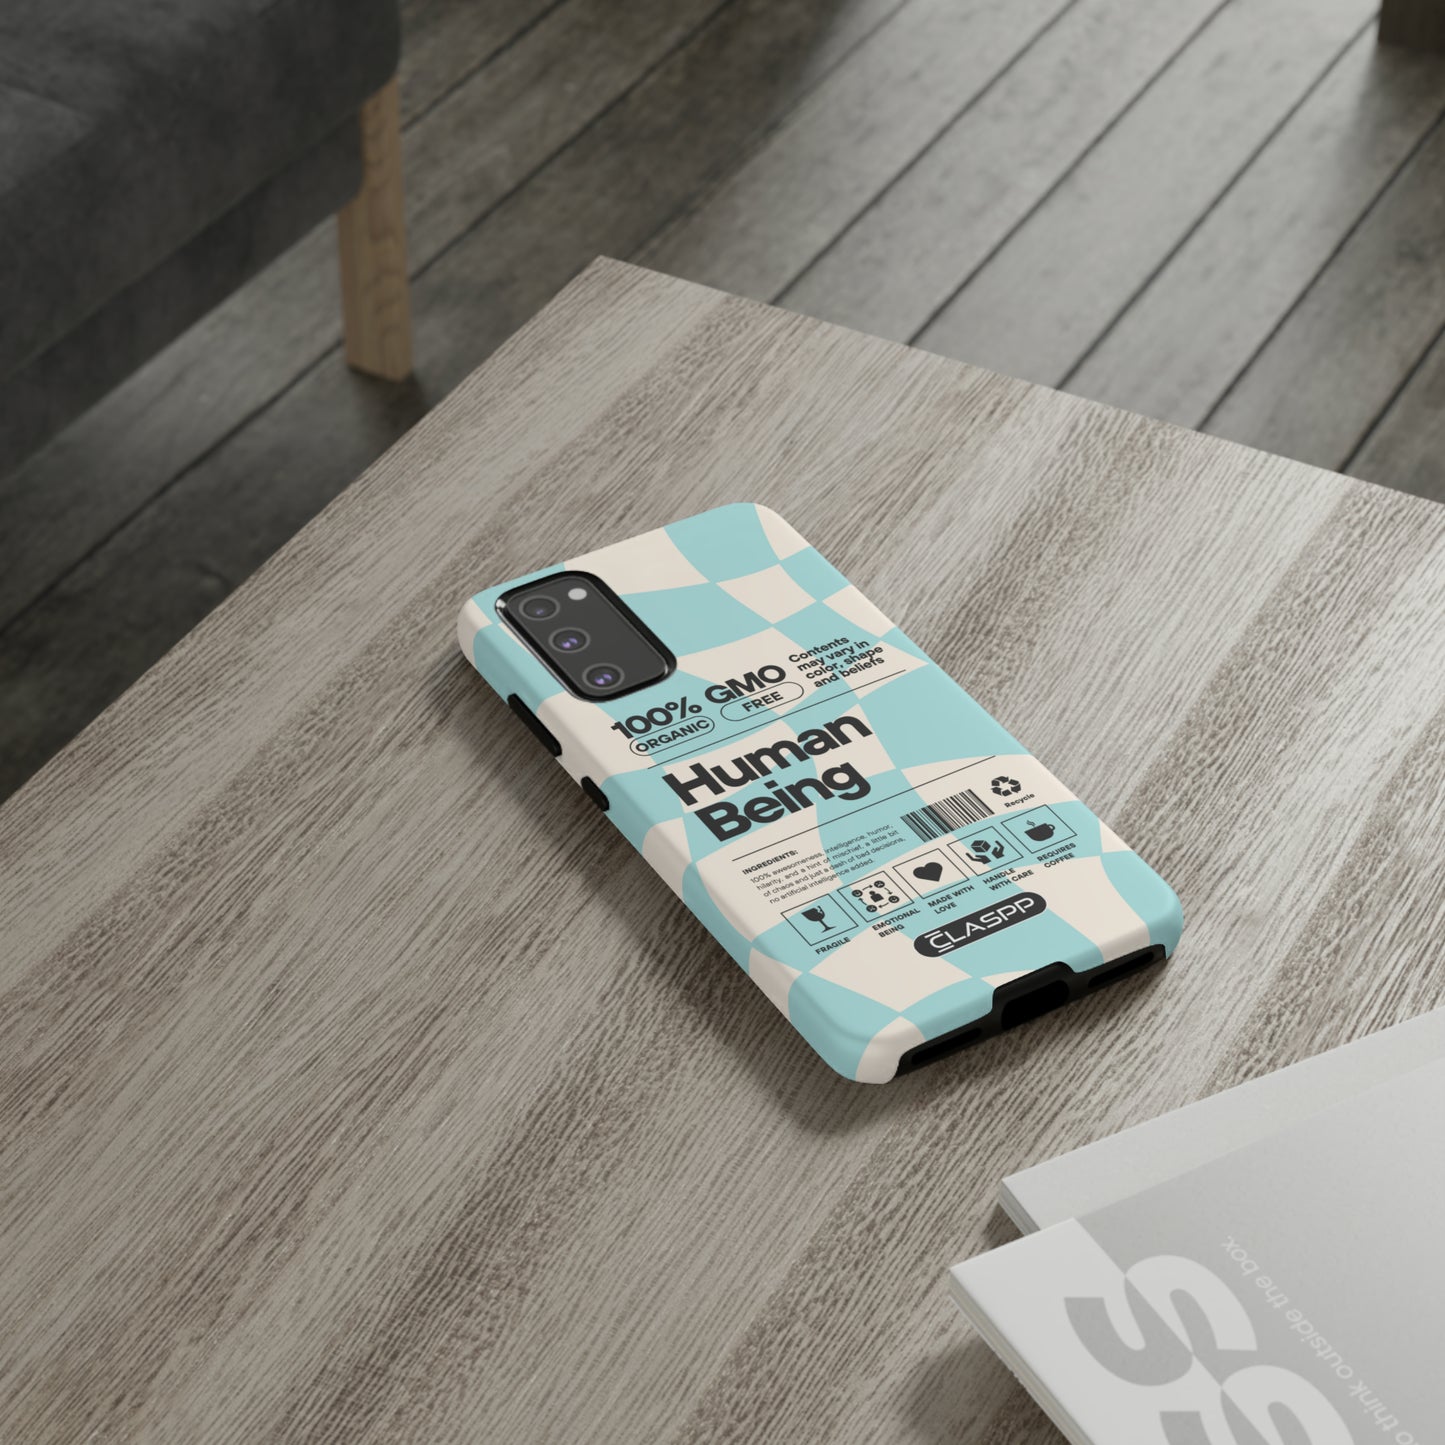 Human Being Colorful #101 | Recyclable Dual Layer Tough Phone Case